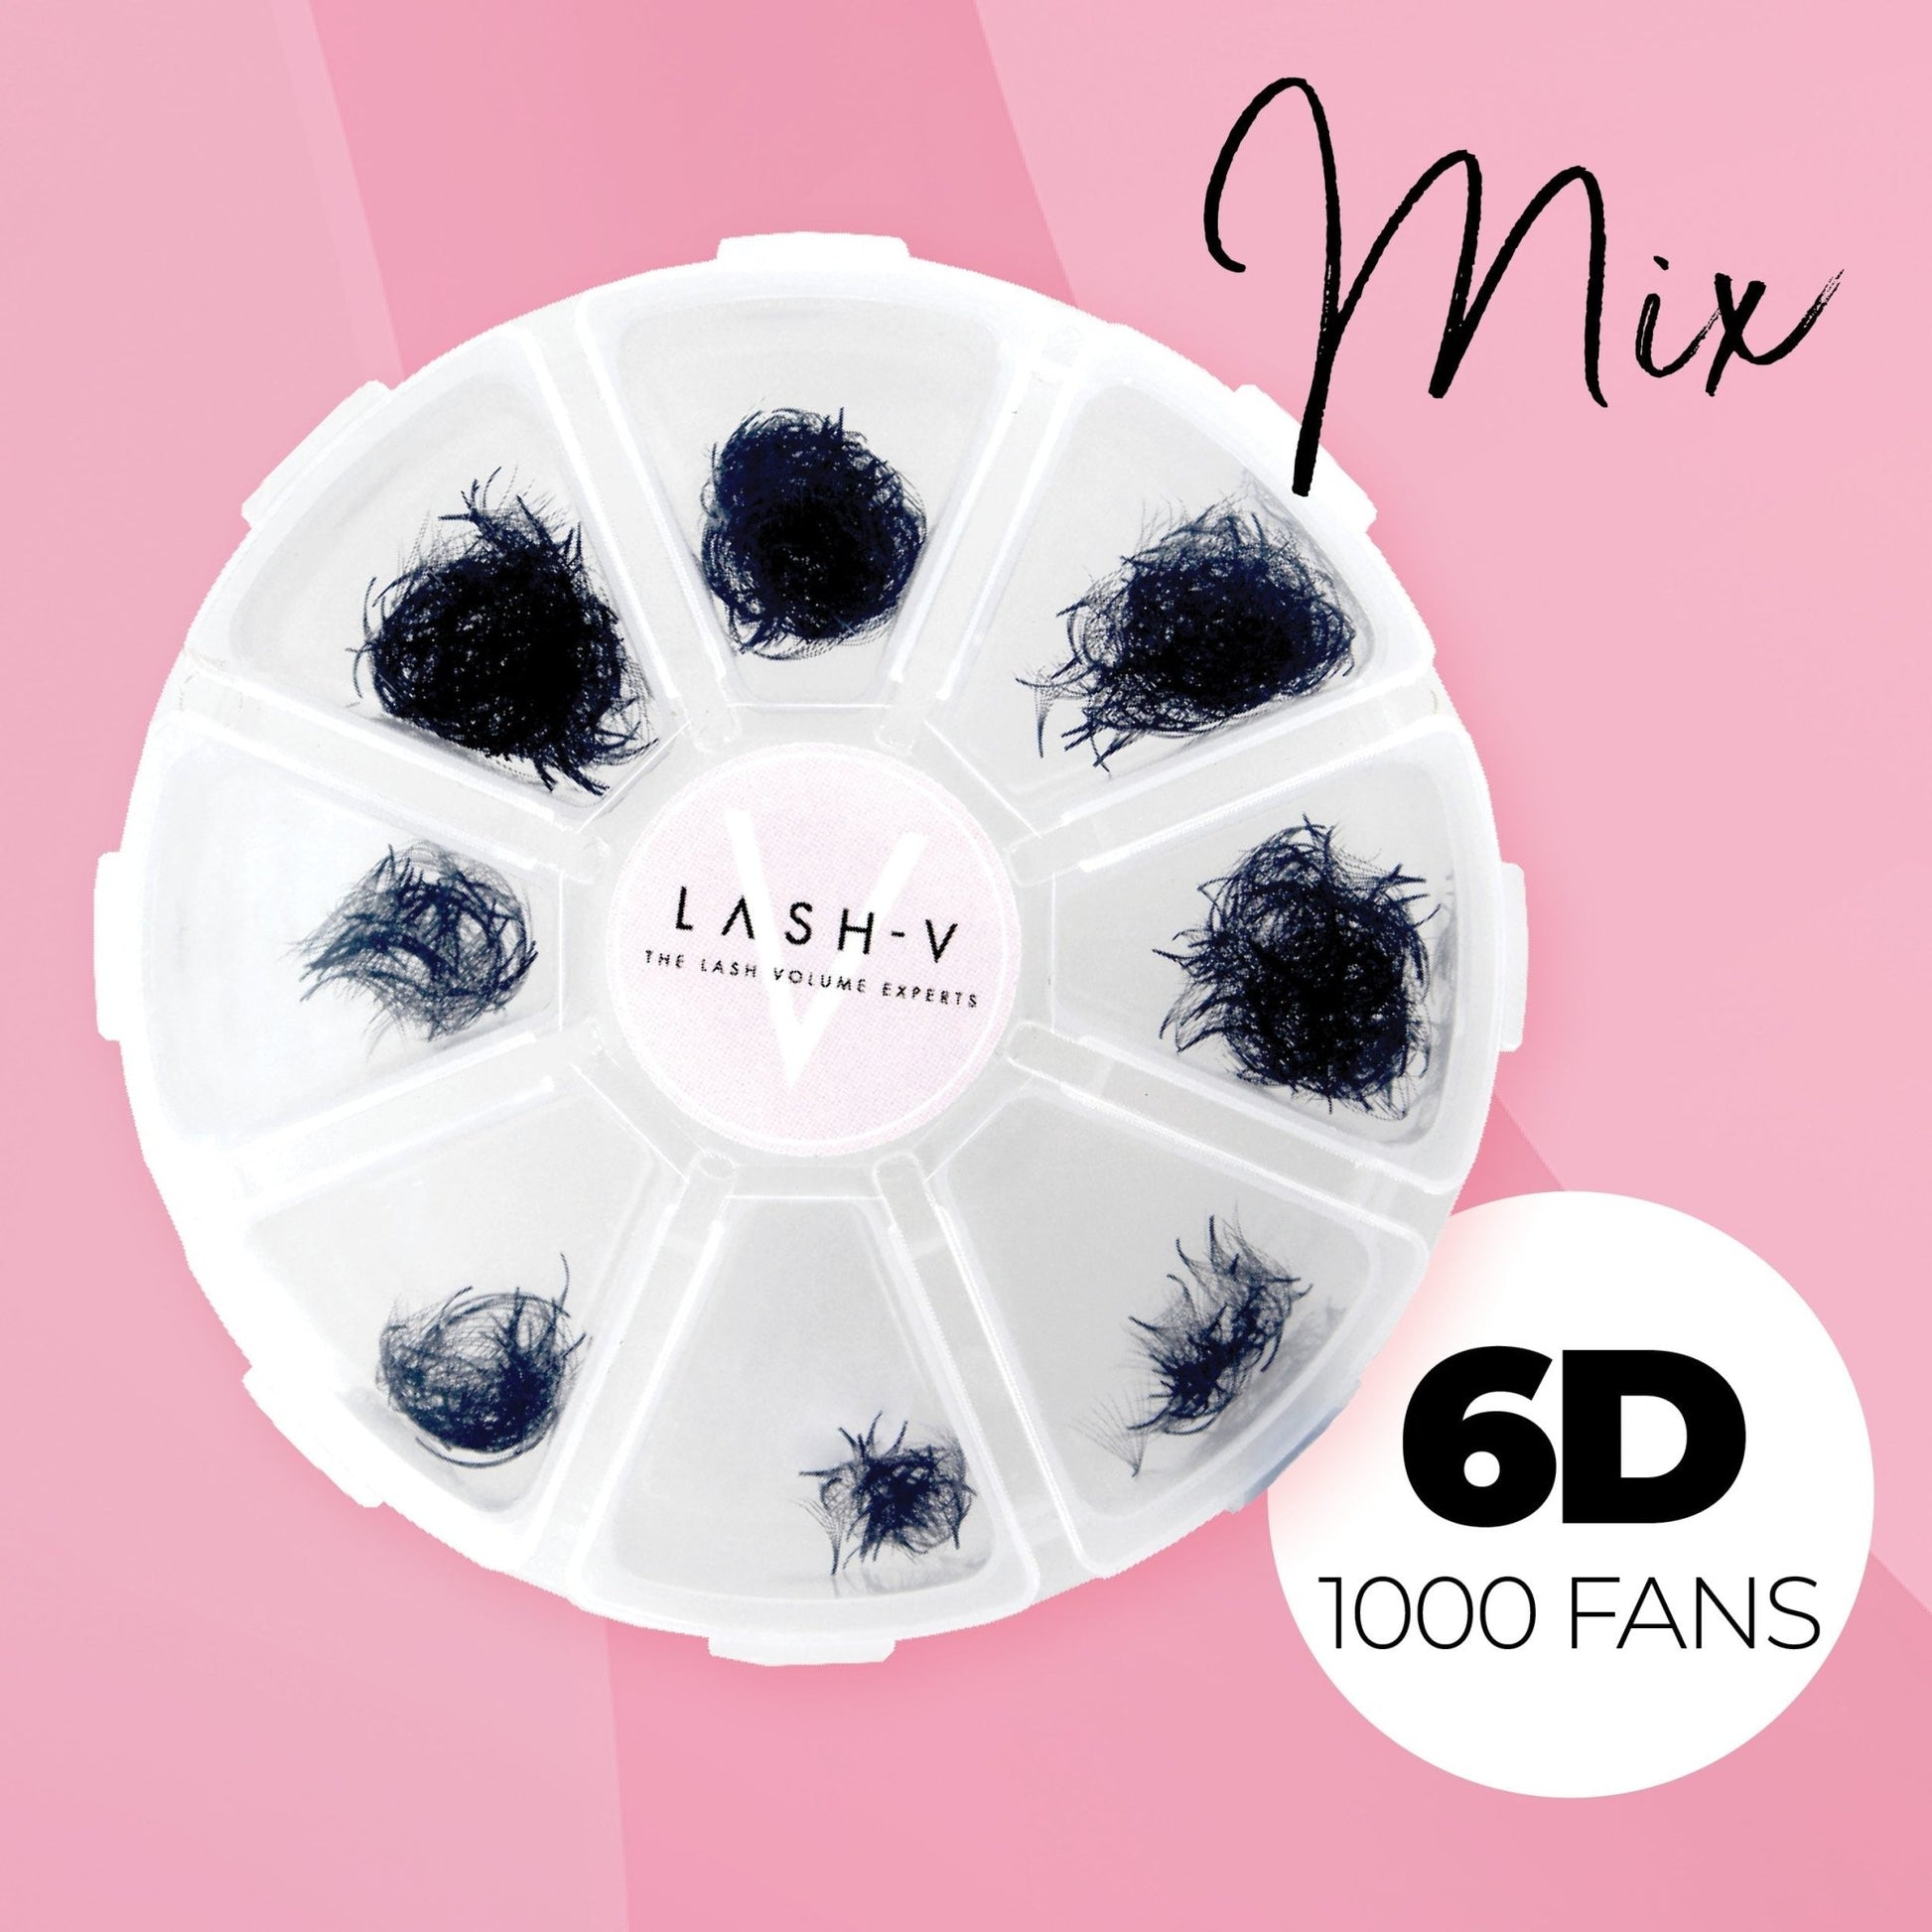 6D Promade Loose - 1000 Mix Fans - One V Salon